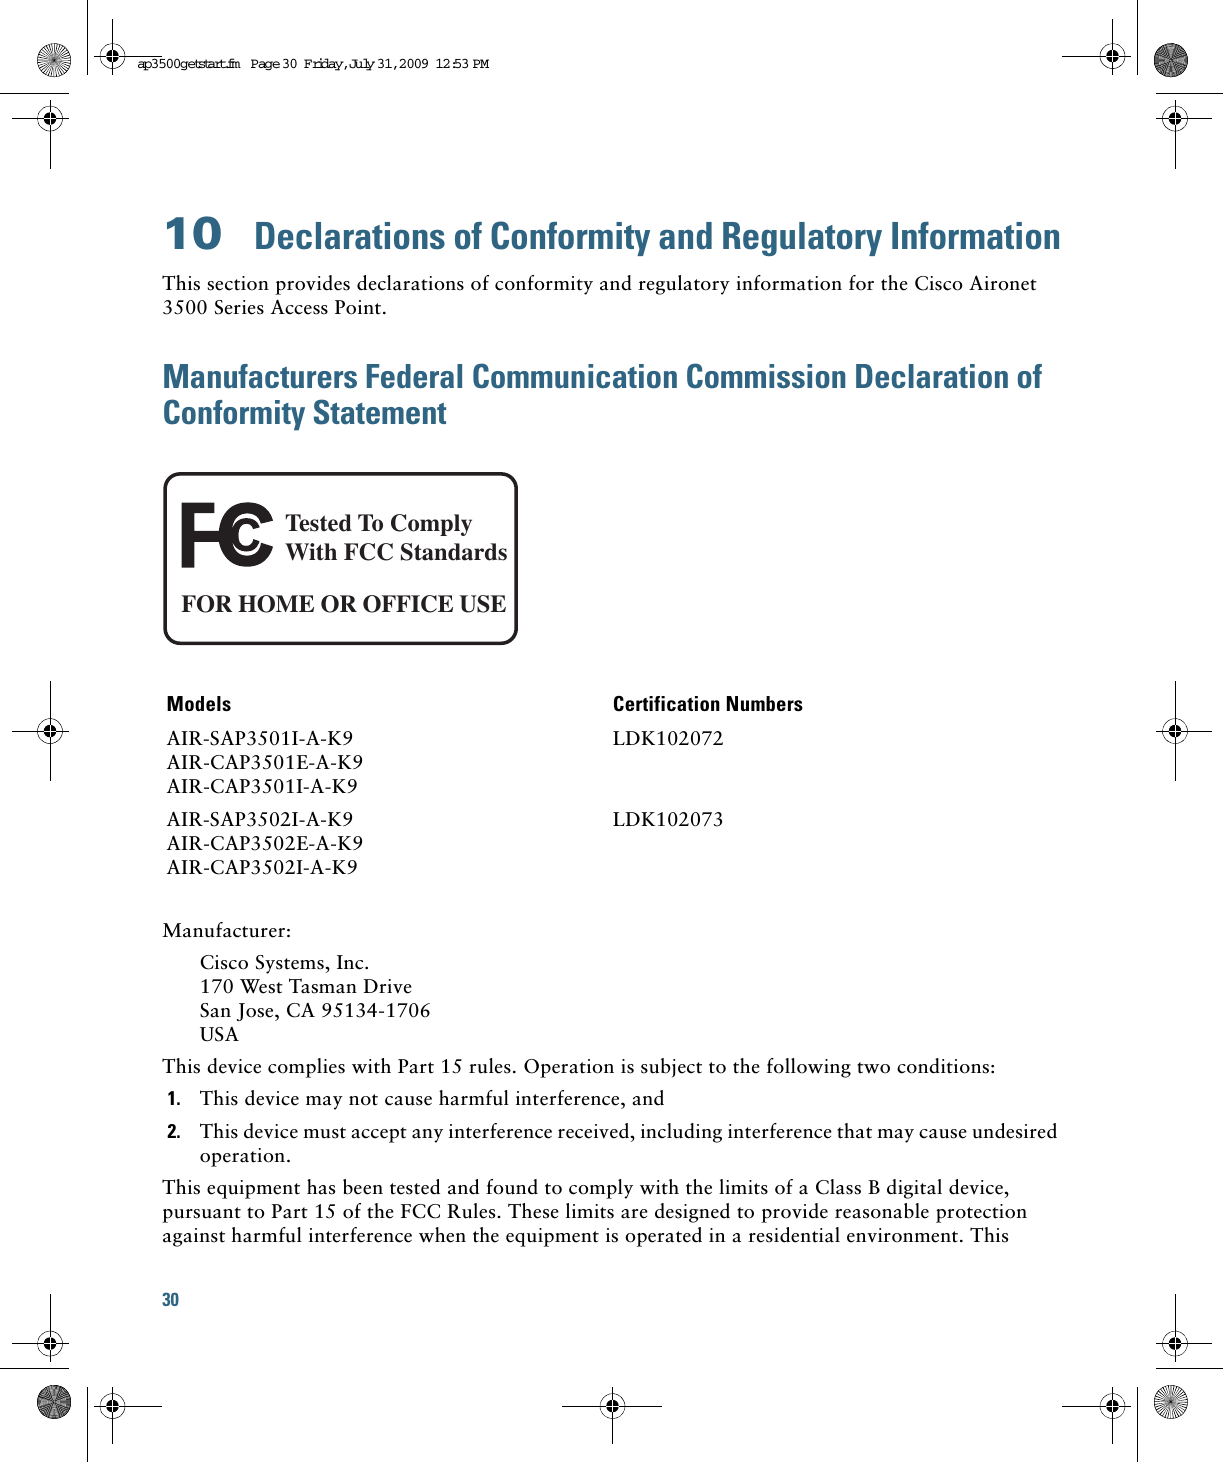 30 10  Declarations of Conformity and Regulatory InformationThis section provides declarations of conformity and regulatory information for the Cisco Aironet 3500 Series Access Point.Manufacturers Federal Communication Commission Declaration of Conformity StatementManufacturer:Cisco Systems, Inc.170 West Tasman DriveSan Jose, CA 95134-1706USAThis device complies with Part 15 rules. Operation is subject to the following two conditions:1. This device may not cause harmful interference, and2. This device must accept any interference received, including interference that may cause undesired operation.This equipment has been tested and found to comply with the limits of a Class B digital device, pursuant to Part 15 of the FCC Rules. These limits are designed to provide reasonable protection against harmful interference when the equipment is operated in a residential environment. This Models Certification NumbersAIR-SAP3501I-A-K9AIR-CAP3501E-A-K9AIR-CAP3501I-A-K9LDK102072AIR-SAP3502I-A-K9AIR-CAP3502E-A-K9AIR-CAP3502I-A-K9LDK102073Tested To ComplyWith FCC StandardsFOR HOME OR OFFICE USEap3500getstart.fm  Page 30  Friday, Ju ly 31, 2009  12:53 PM